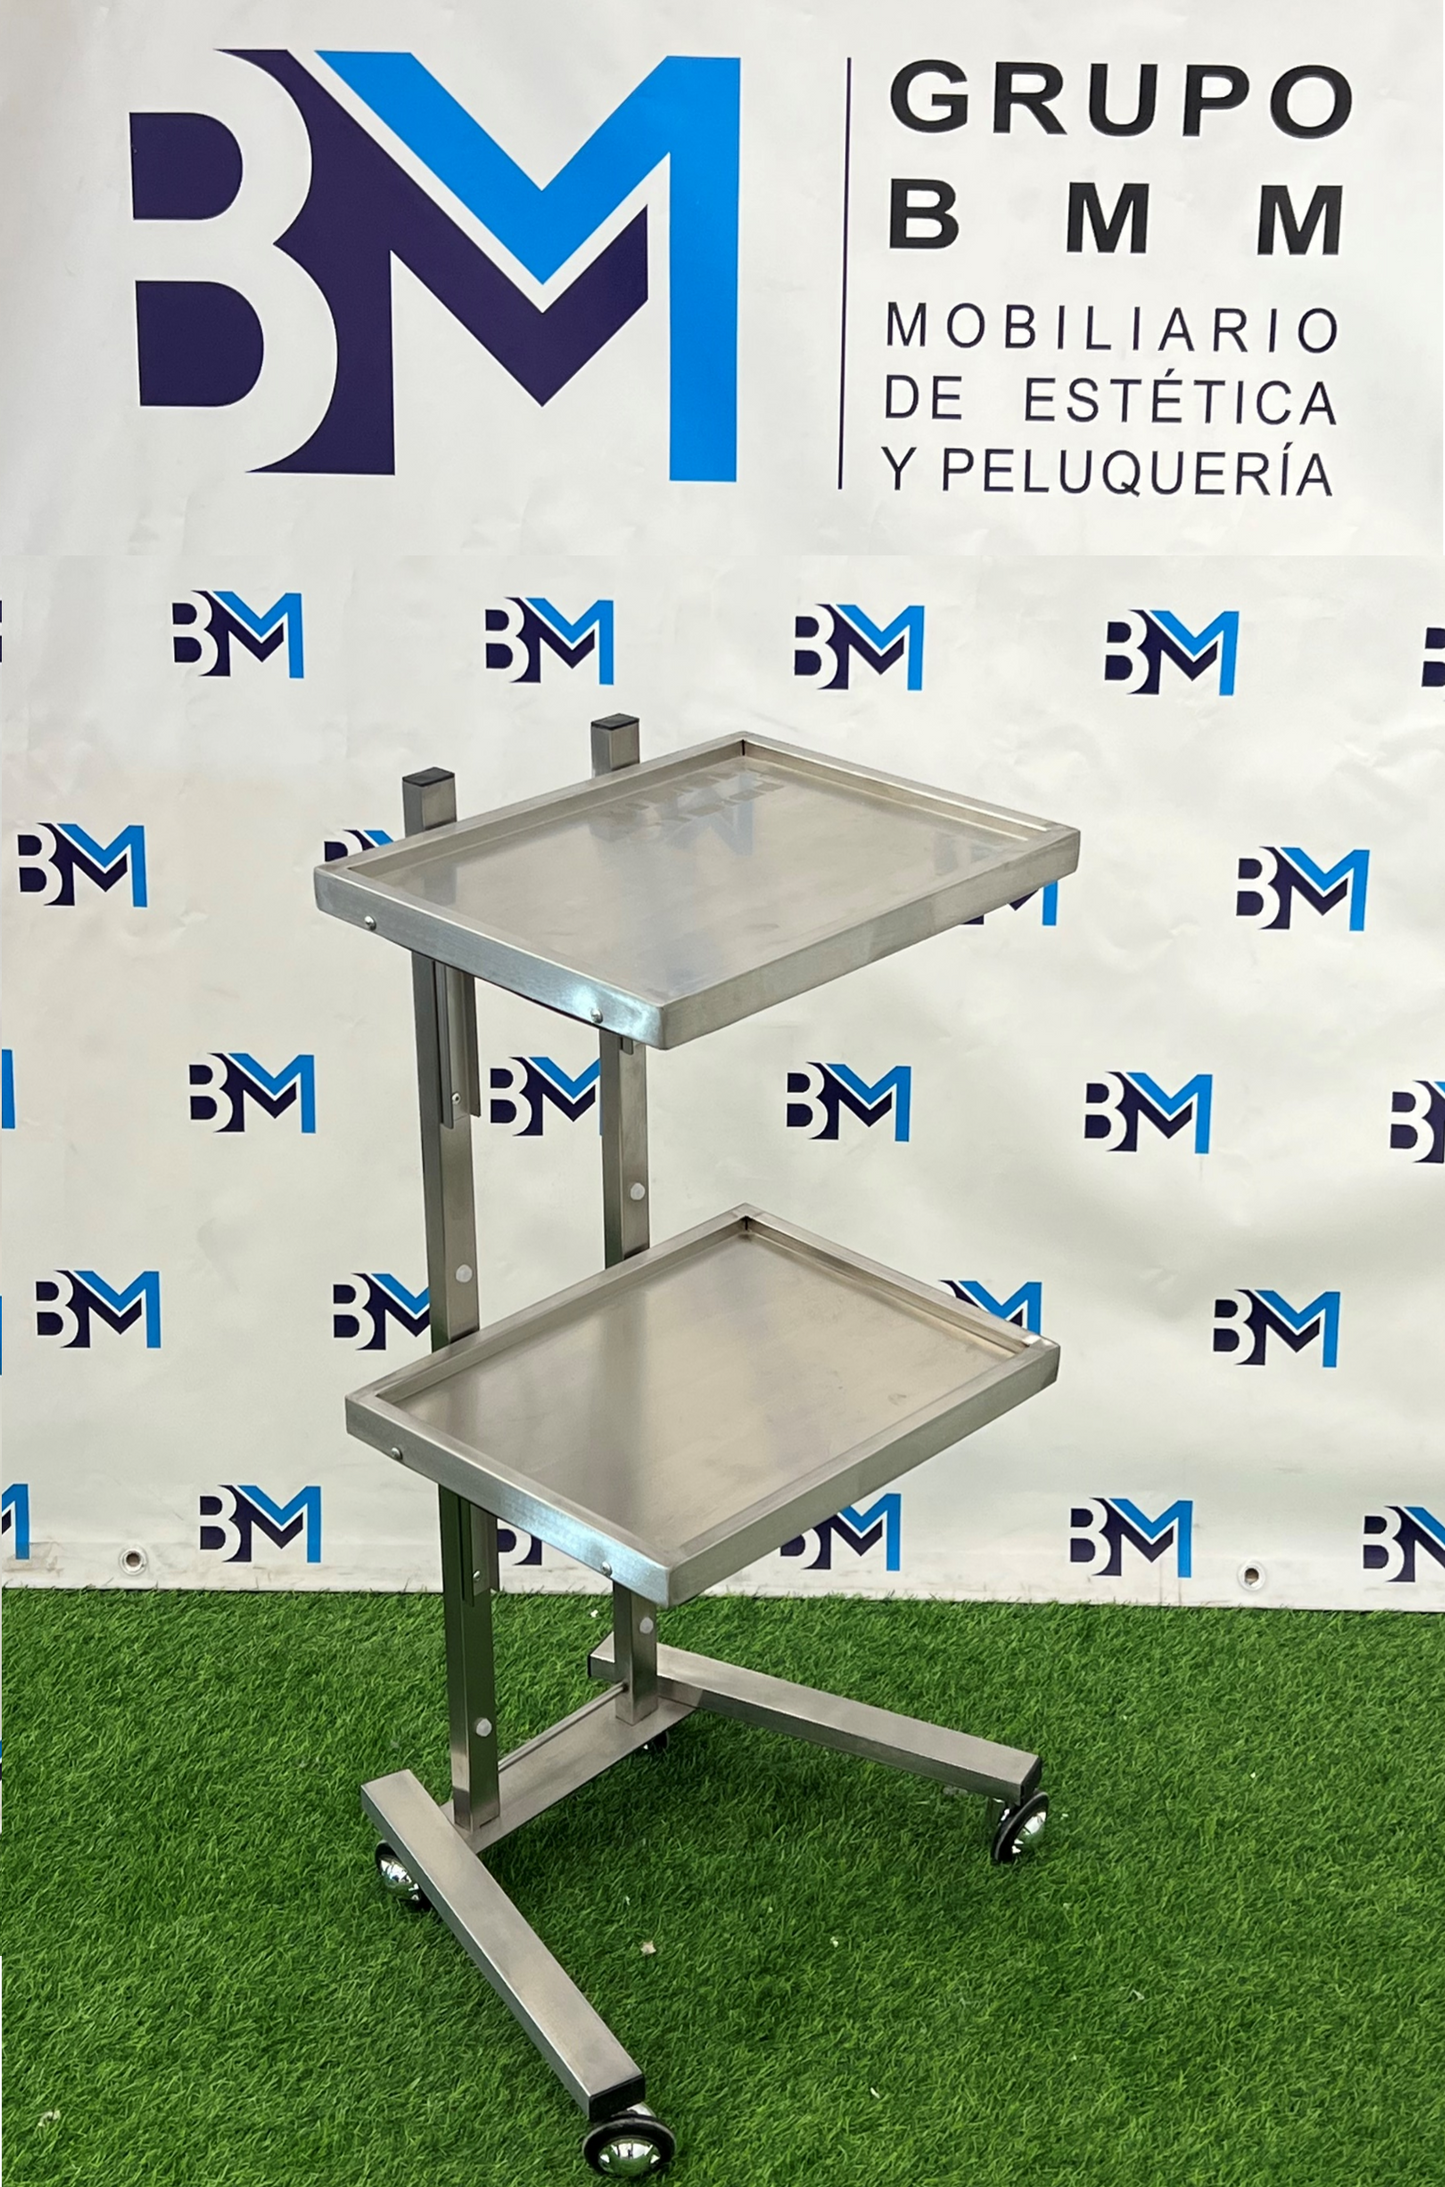 Metallic auxiliary trolley with 2 shelves